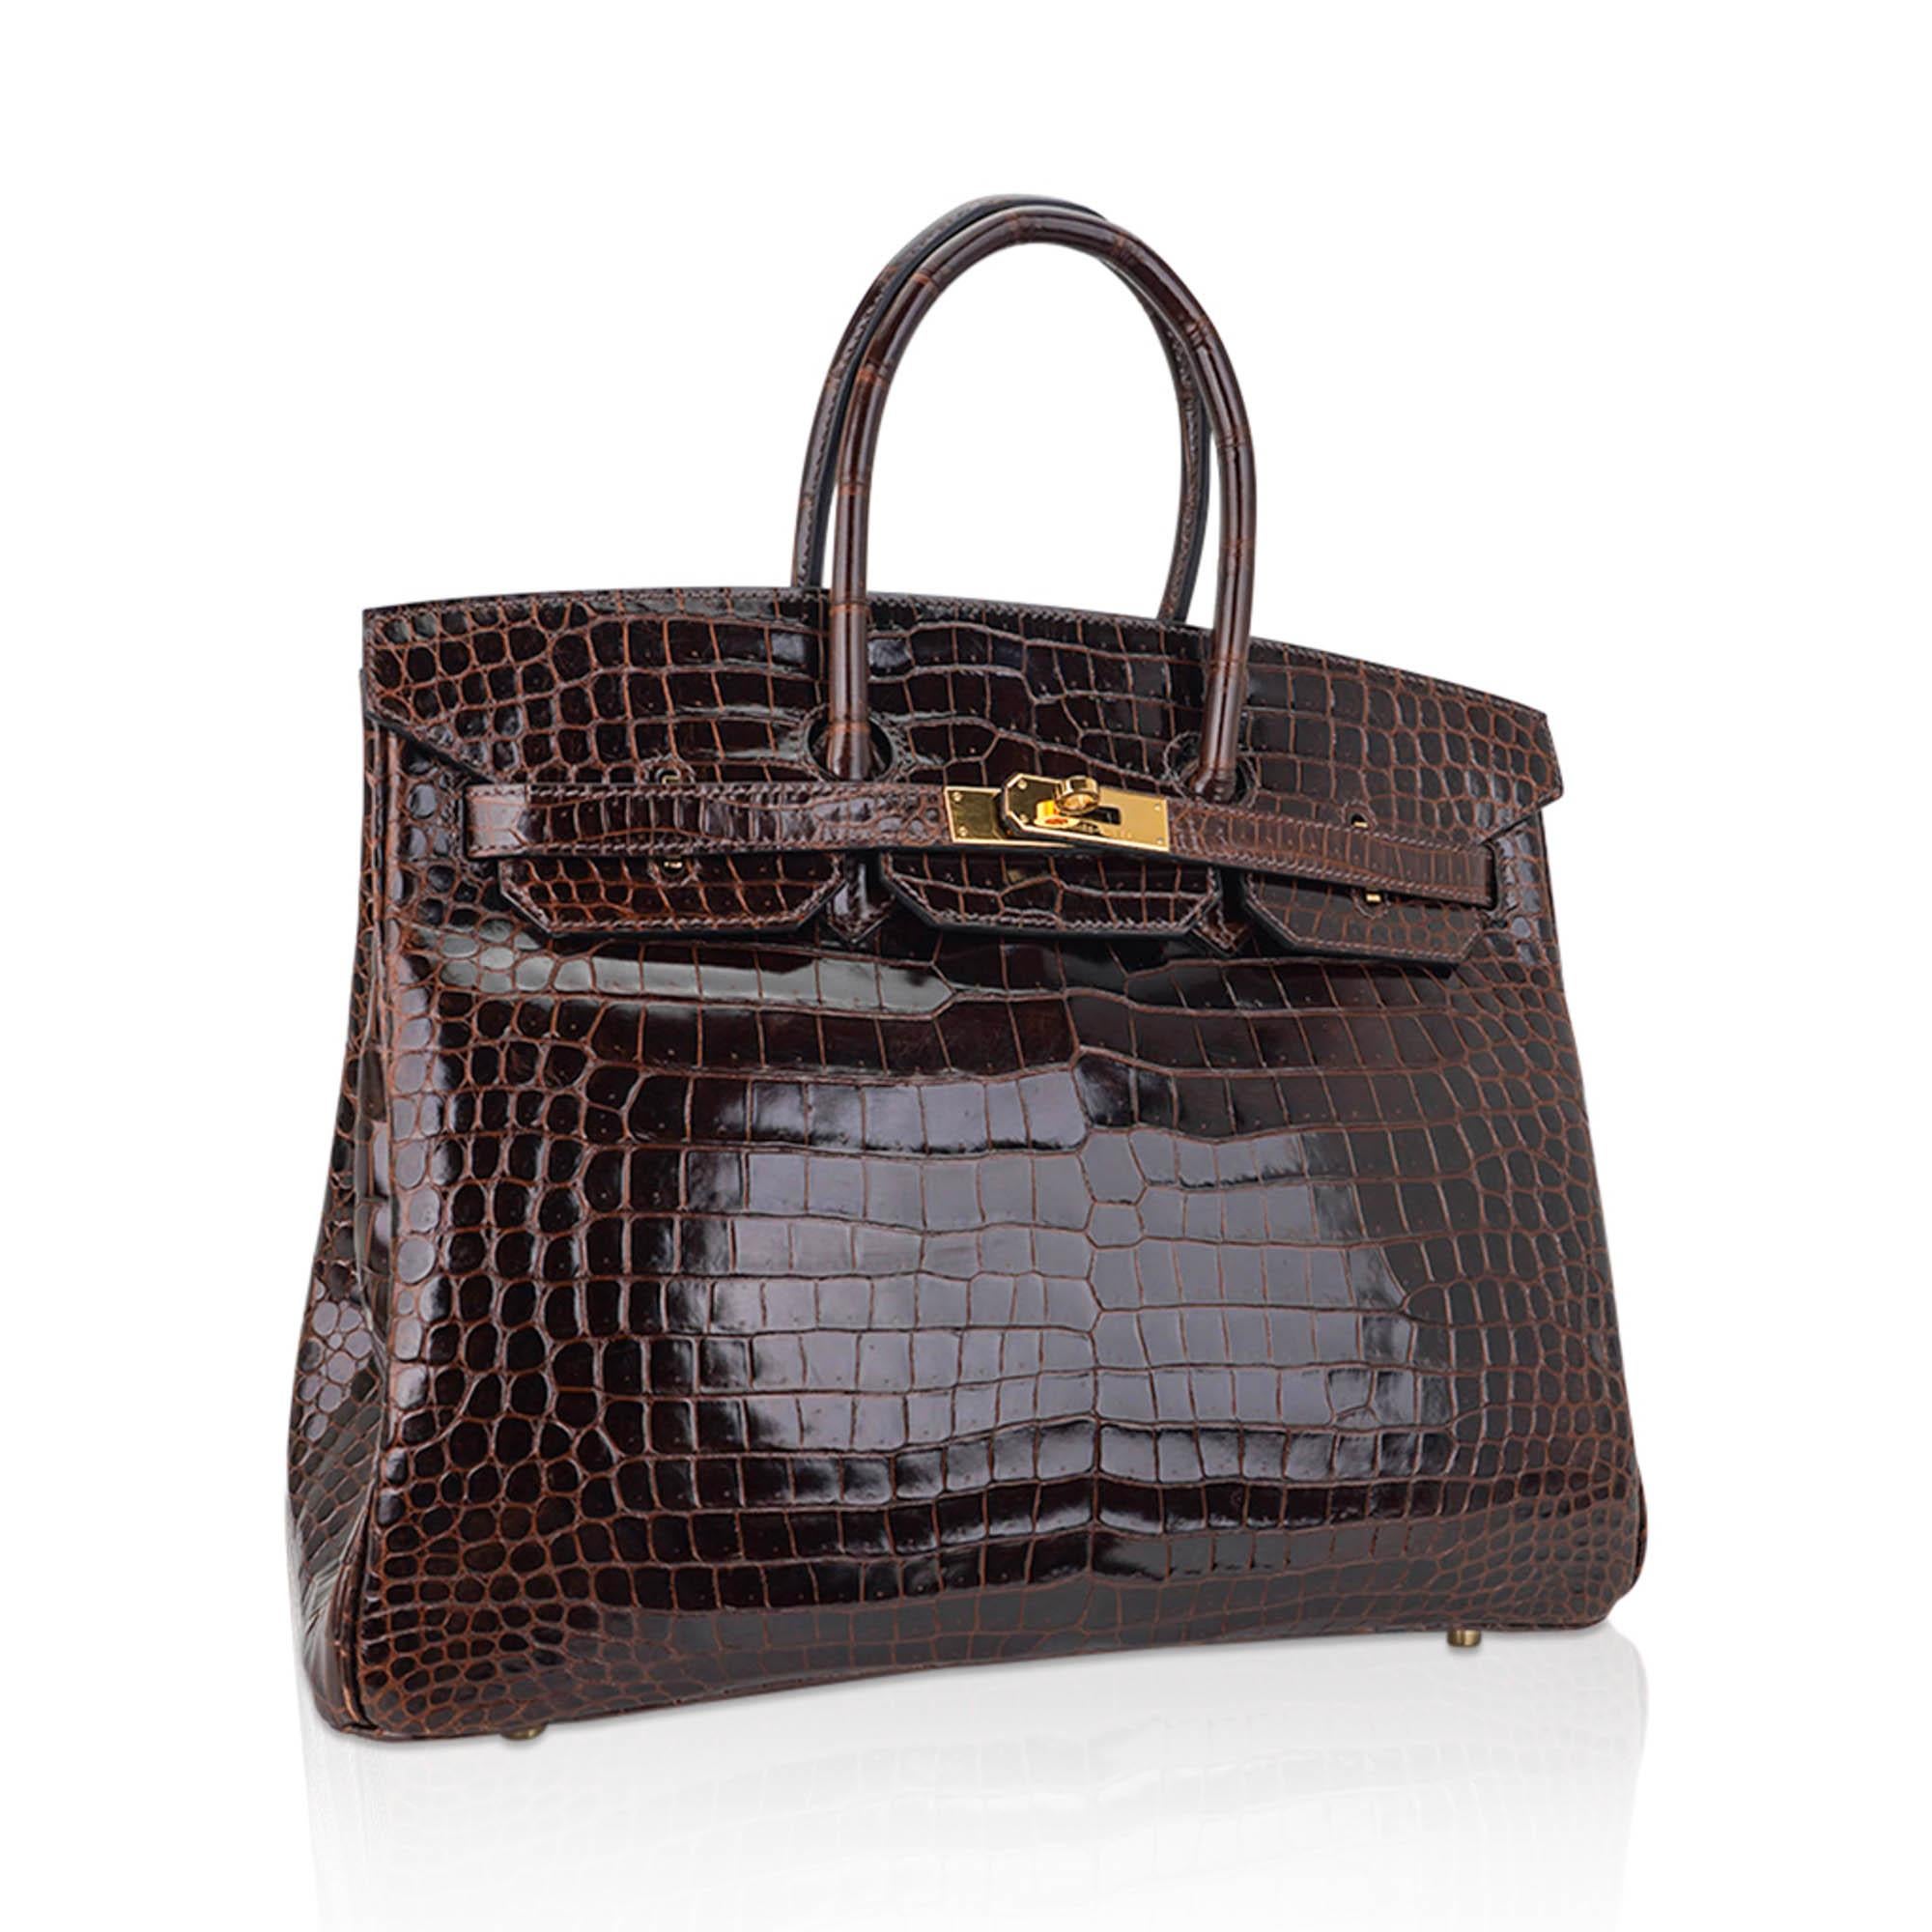 Mightychic offers an Hermes Birkin 35 bag featured in rich Cocoan Porosus Crocodile.
This Hermes crocodile Birkin bag is a deep brown and is stunning with every colour, including black.
Gorgeous with Gold hardware.
Porosus Hermes crocodile skin has